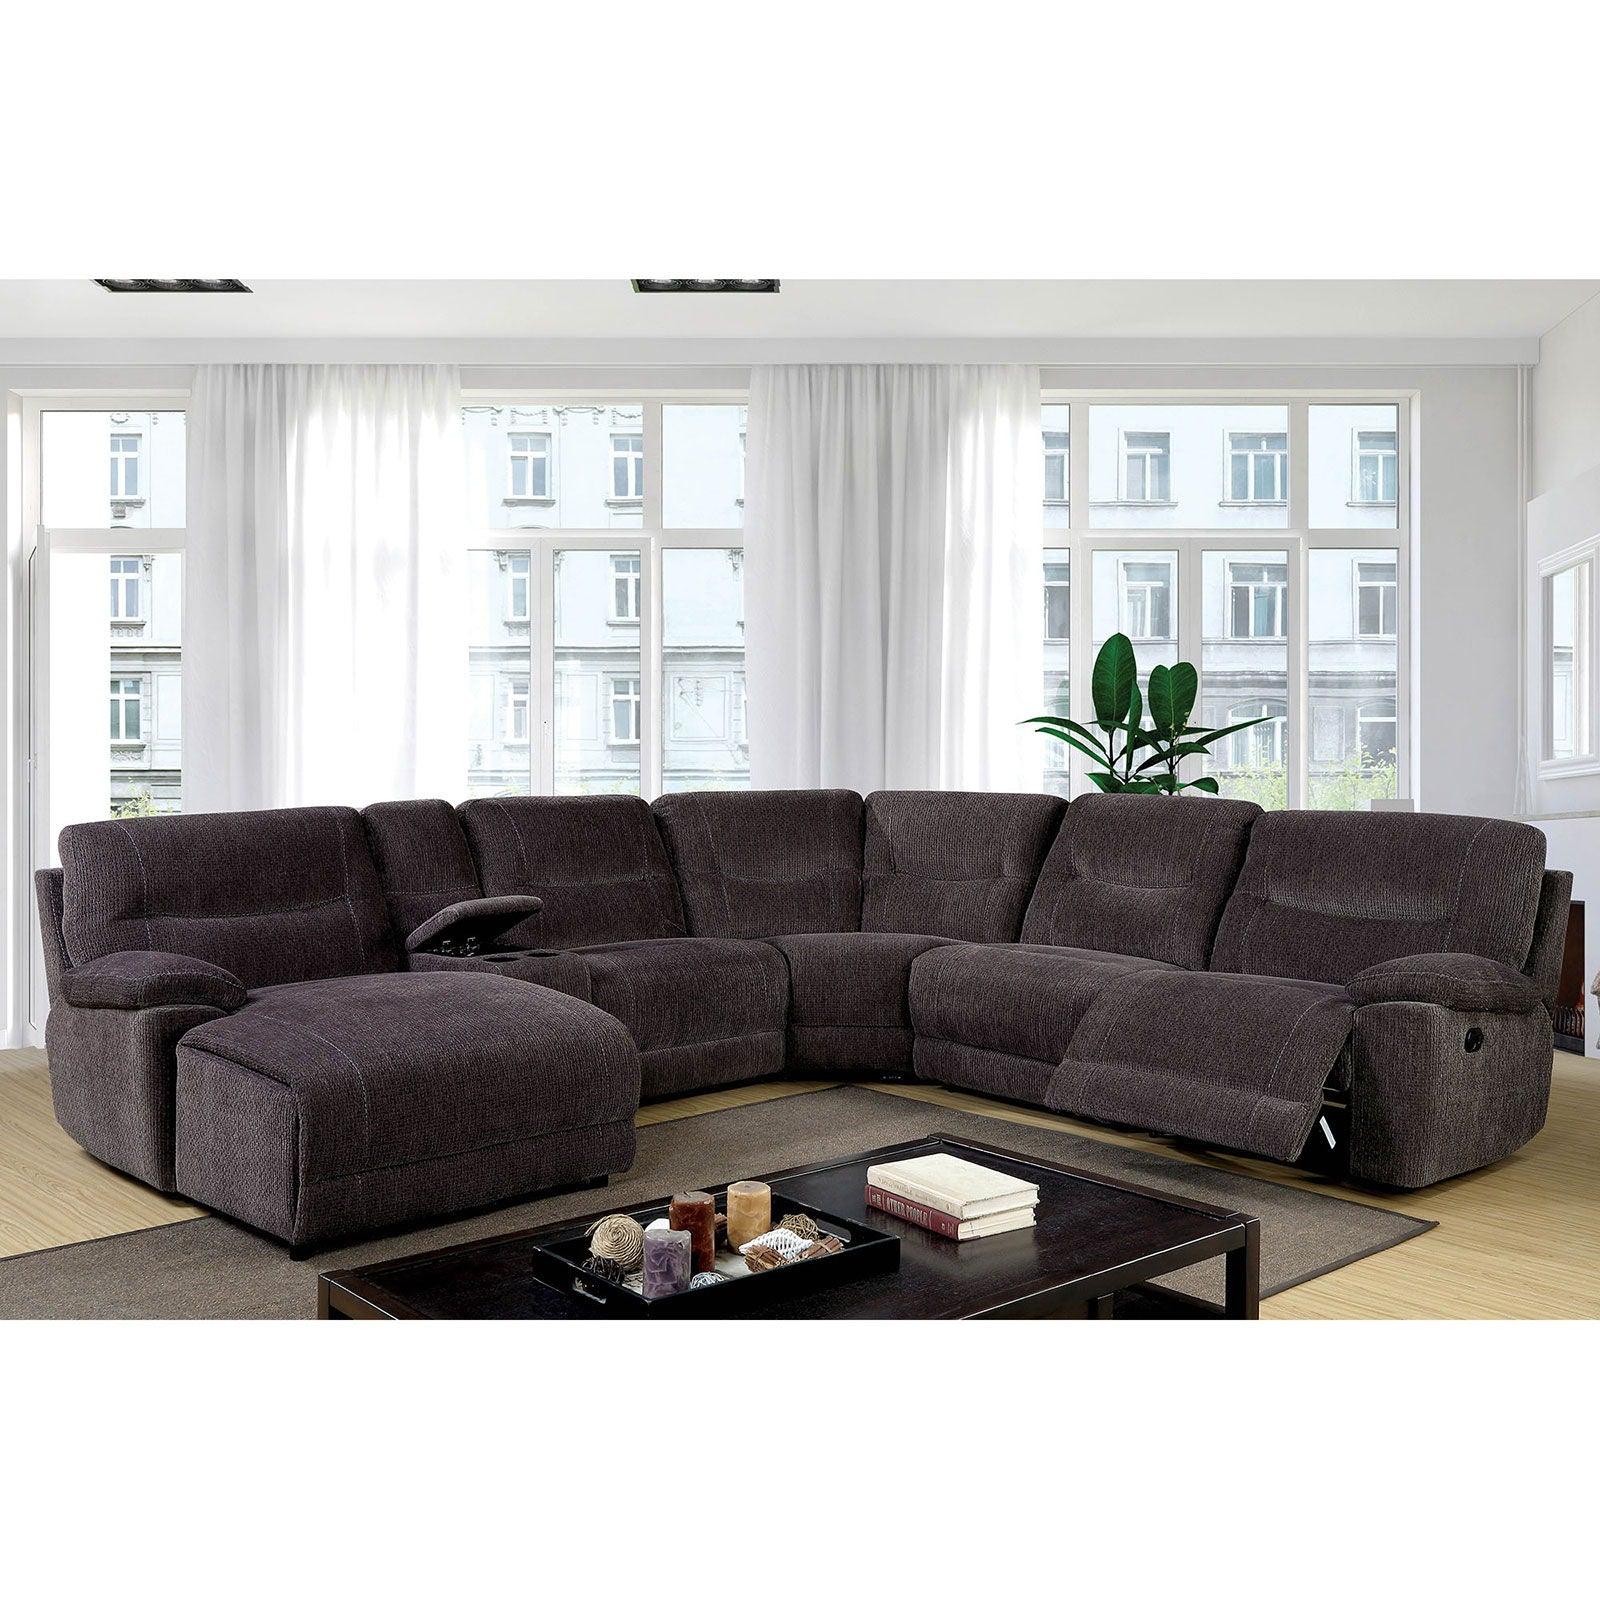 Furniture of America - Zuben - Sectional With Console - Gray - 5th Avenue Furniture